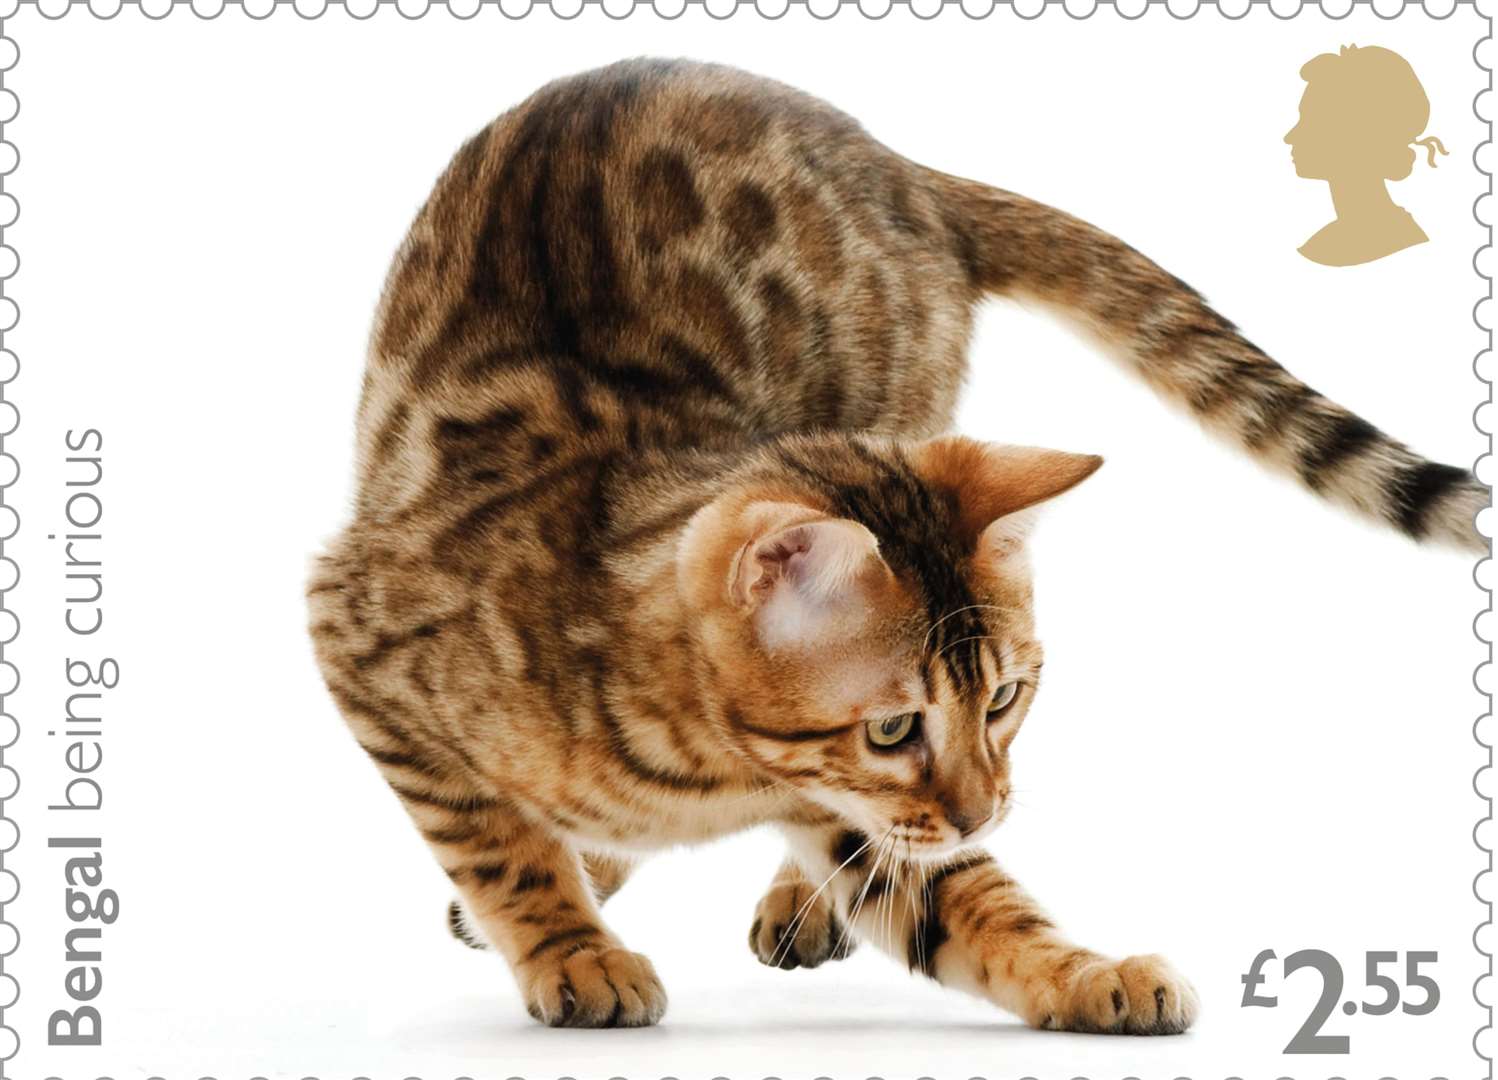 Royal Mail has issued a set of stamps celebrating the domestic cat